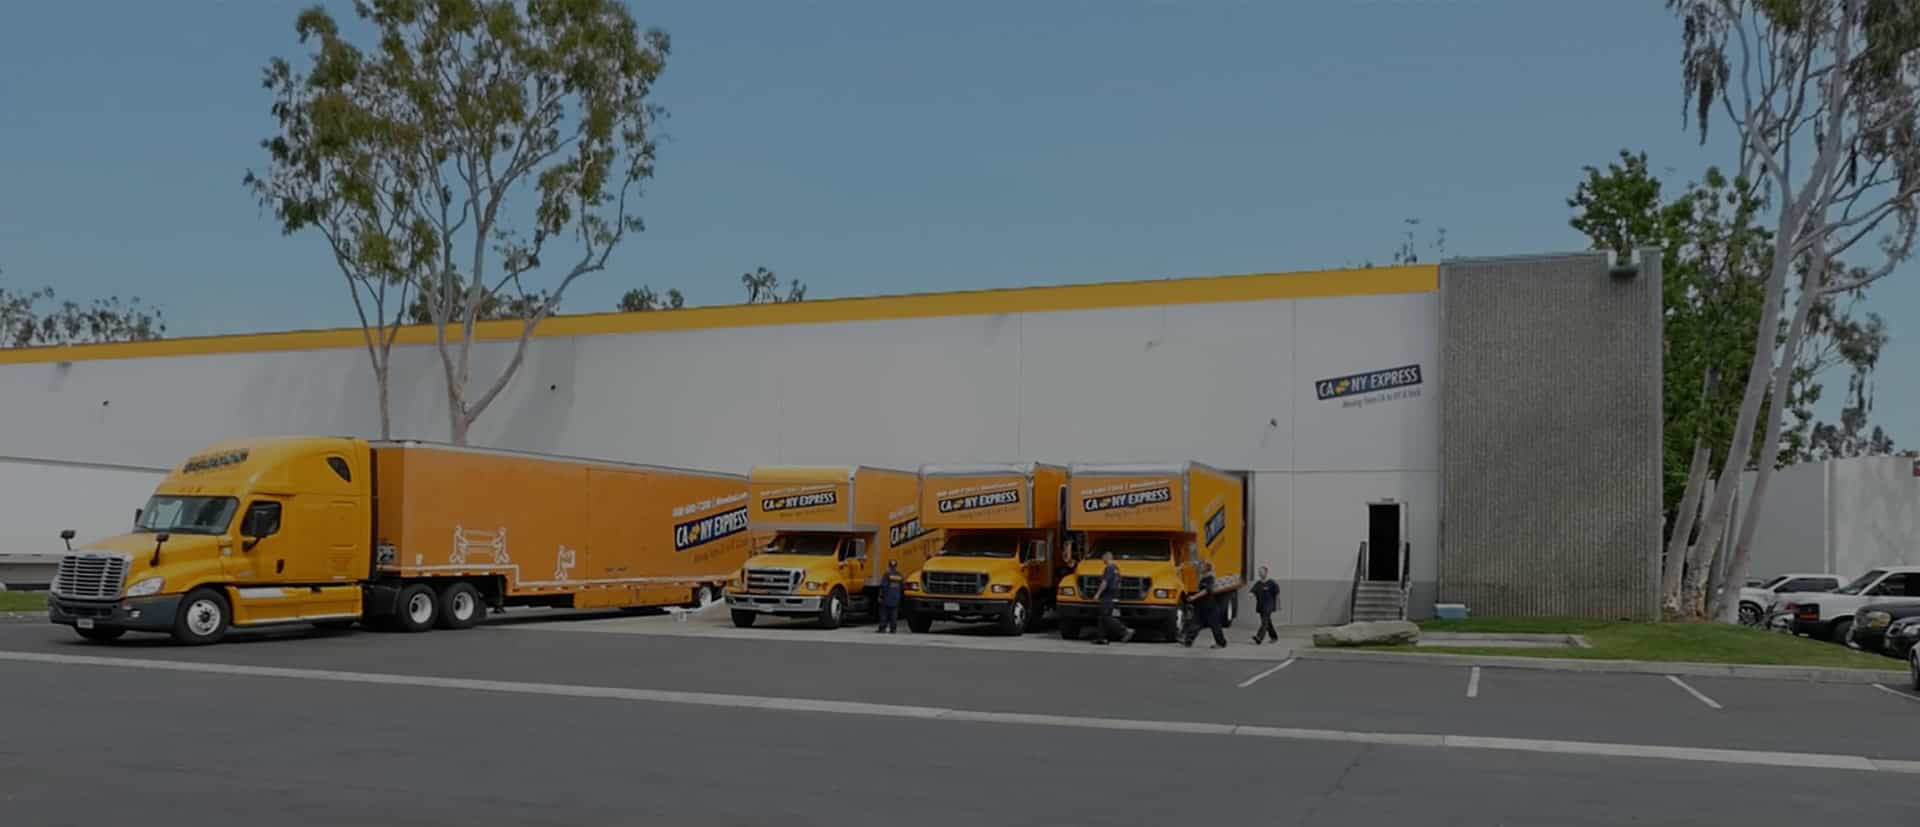 Long Distance Movers in Los Angeles and the Weight of Your Shipment